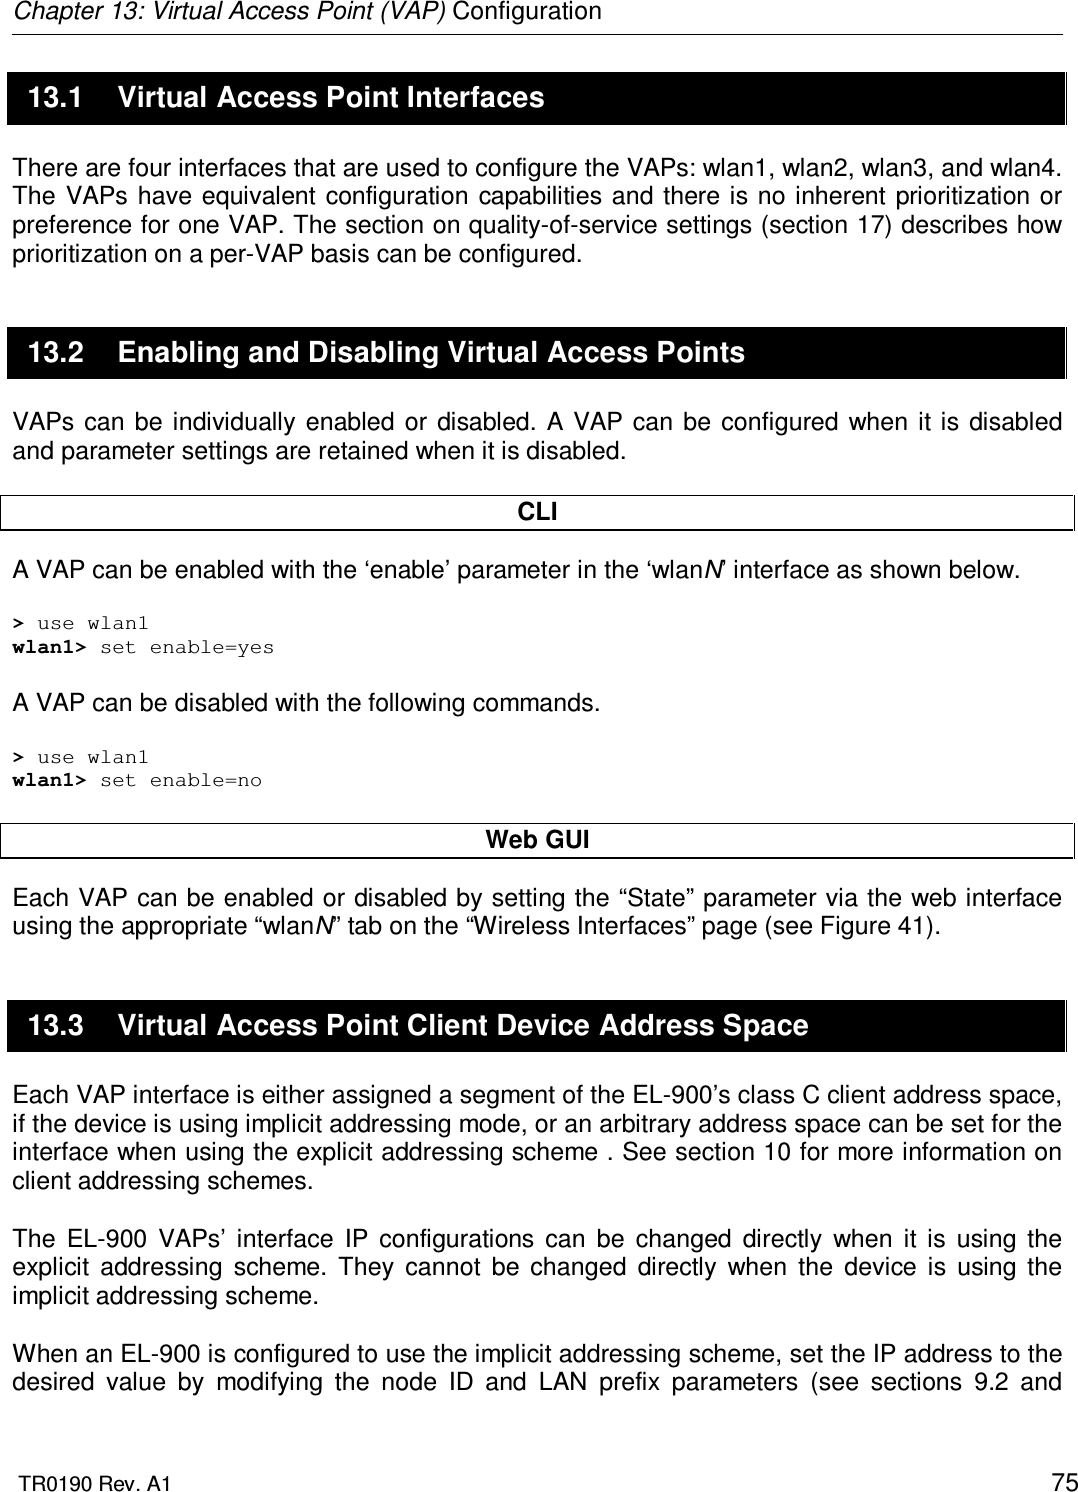 Chapter 13: Virtual Access Point (VAP) Configuration  TR0190 Rev. A1    75 13.1  Virtual Access Point Interfaces There are four interfaces that are used to configure the VAPs: wlan1, wlan2, wlan3, and wlan4. The  VAPs have equivalent configuration capabilities  and  there is  no inherent  prioritization or preference for one VAP. The section on quality-of-service settings (section 17) describes how prioritization on a per-VAP basis can be configured. 13.2  Enabling and Disabling Virtual Access Points VAPs  can be  individually  enabled  or disabled.  A  VAP can  be  configured  when  it  is disabled and parameter settings are retained when it is disabled.  CLI A VAP can be enabled with the ‘enable’ parameter in the ‘wlanN’ interface as shown below.  &gt; use wlan1 wlan1&gt; set enable=yes  A VAP can be disabled with the following commands.  &gt; use wlan1 wlan1&gt; set enable=no  Web GUI Each VAP can be enabled or disabled by setting the “State” parameter via the web interface using the appropriate “wlanN” tab on the “Wireless Interfaces” page (see Figure 41).  13.3  Virtual Access Point Client Device Address Space Each VAP interface is either assigned a segment of the EL-900’s class C client address space, if the device is using implicit addressing mode, or an arbitrary address space can be set for the interface when using the explicit addressing scheme . See section 10 for more information on client addressing schemes.  The  EL-900  VAPs’  interface  IP  configurations  can  be  changed  directly  when  it  is  using  the explicit  addressing  scheme.  They  cannot  be  changed  directly  when  the  device  is  using  the implicit addressing scheme.   When an EL-900 is configured to use the implicit addressing scheme, set the IP address to the desired  value  by  modifying  the  node  ID  and  LAN  prefix  parameters  (see  sections  9.2  and 